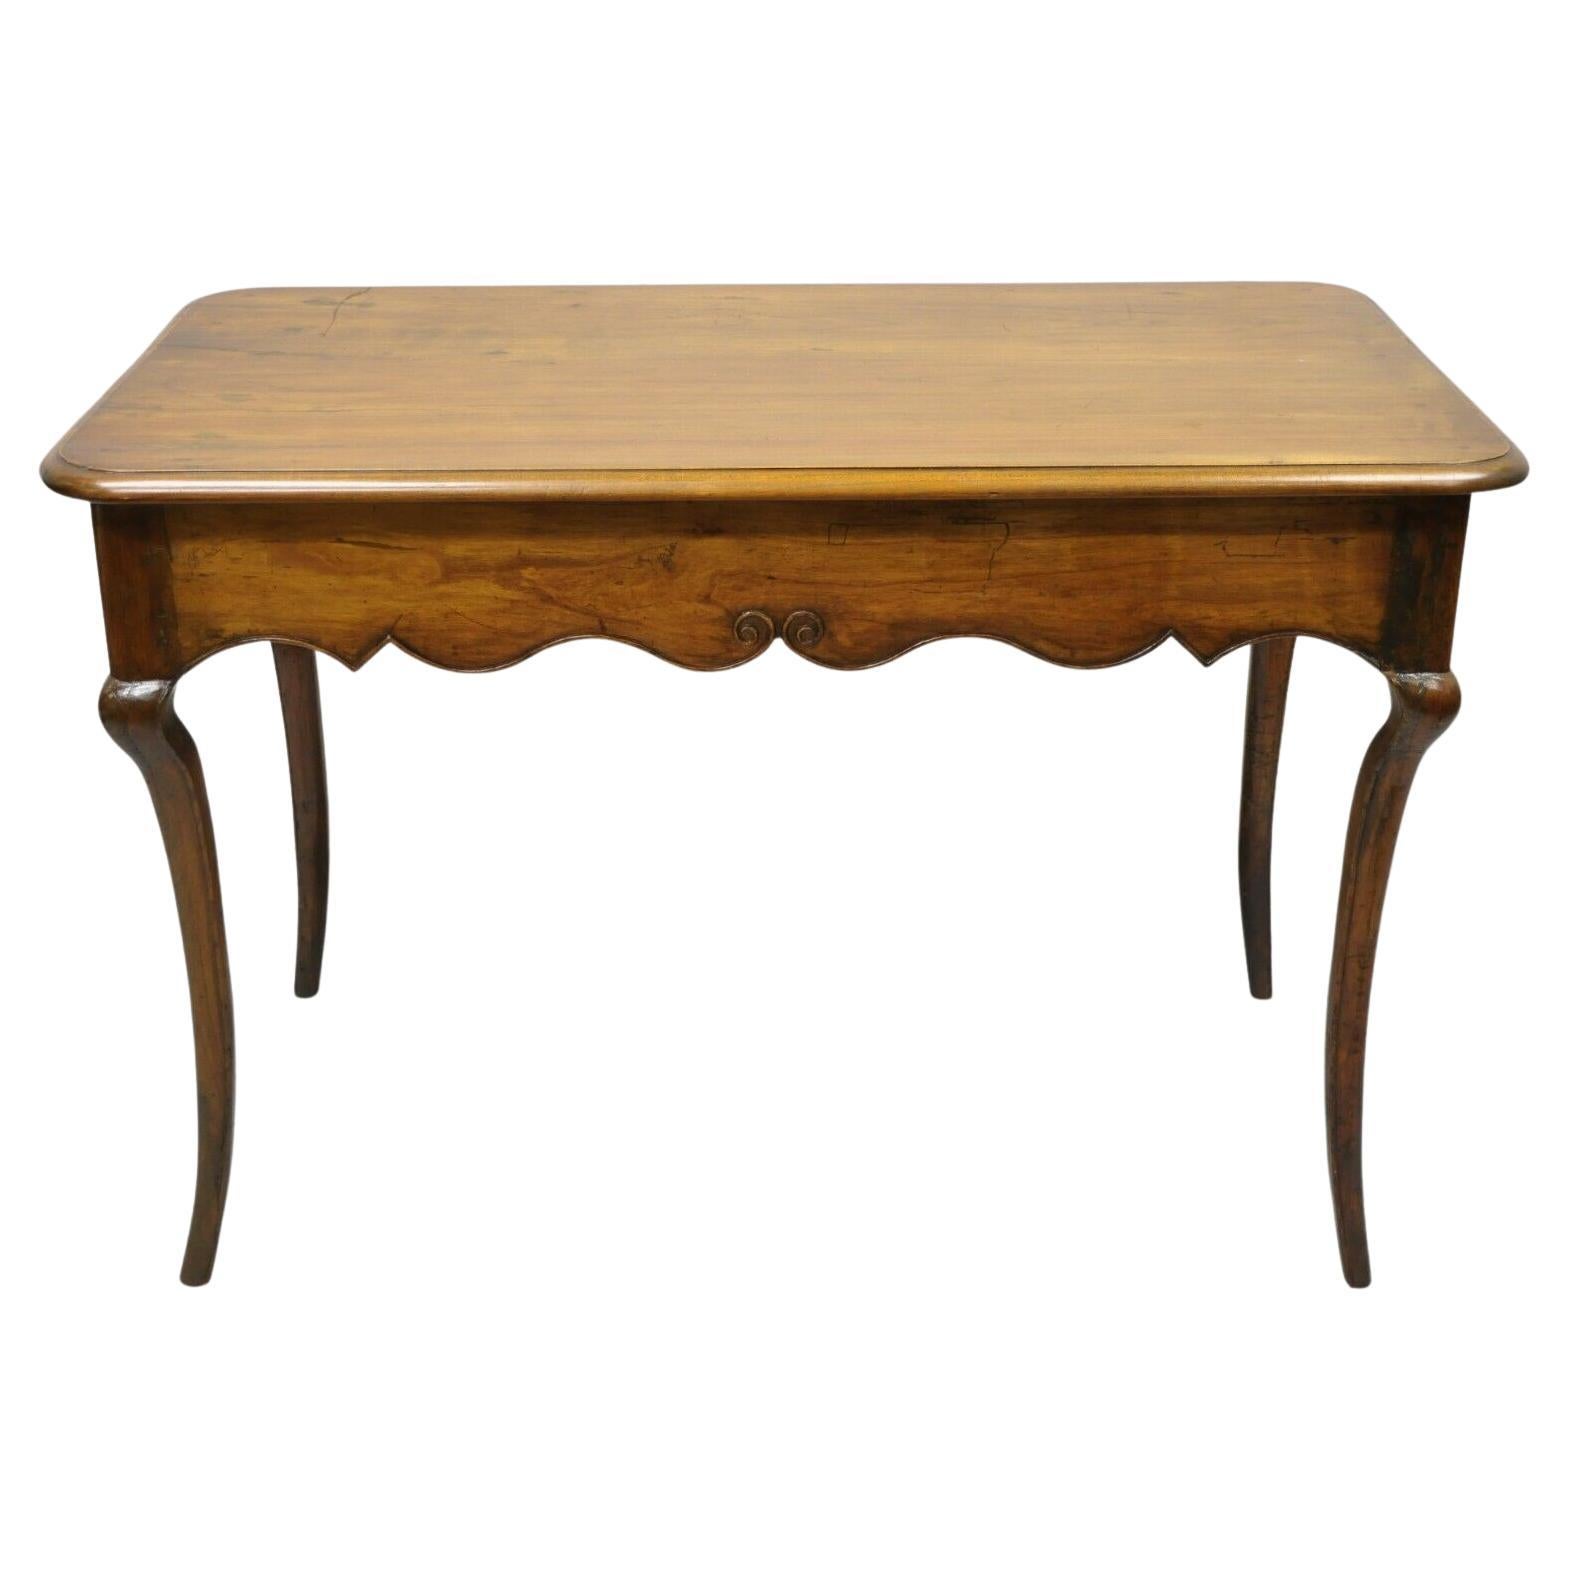 Antique Italian Provincial Carved Distressed Cherry Saber Leg Desk Console Table For Sale